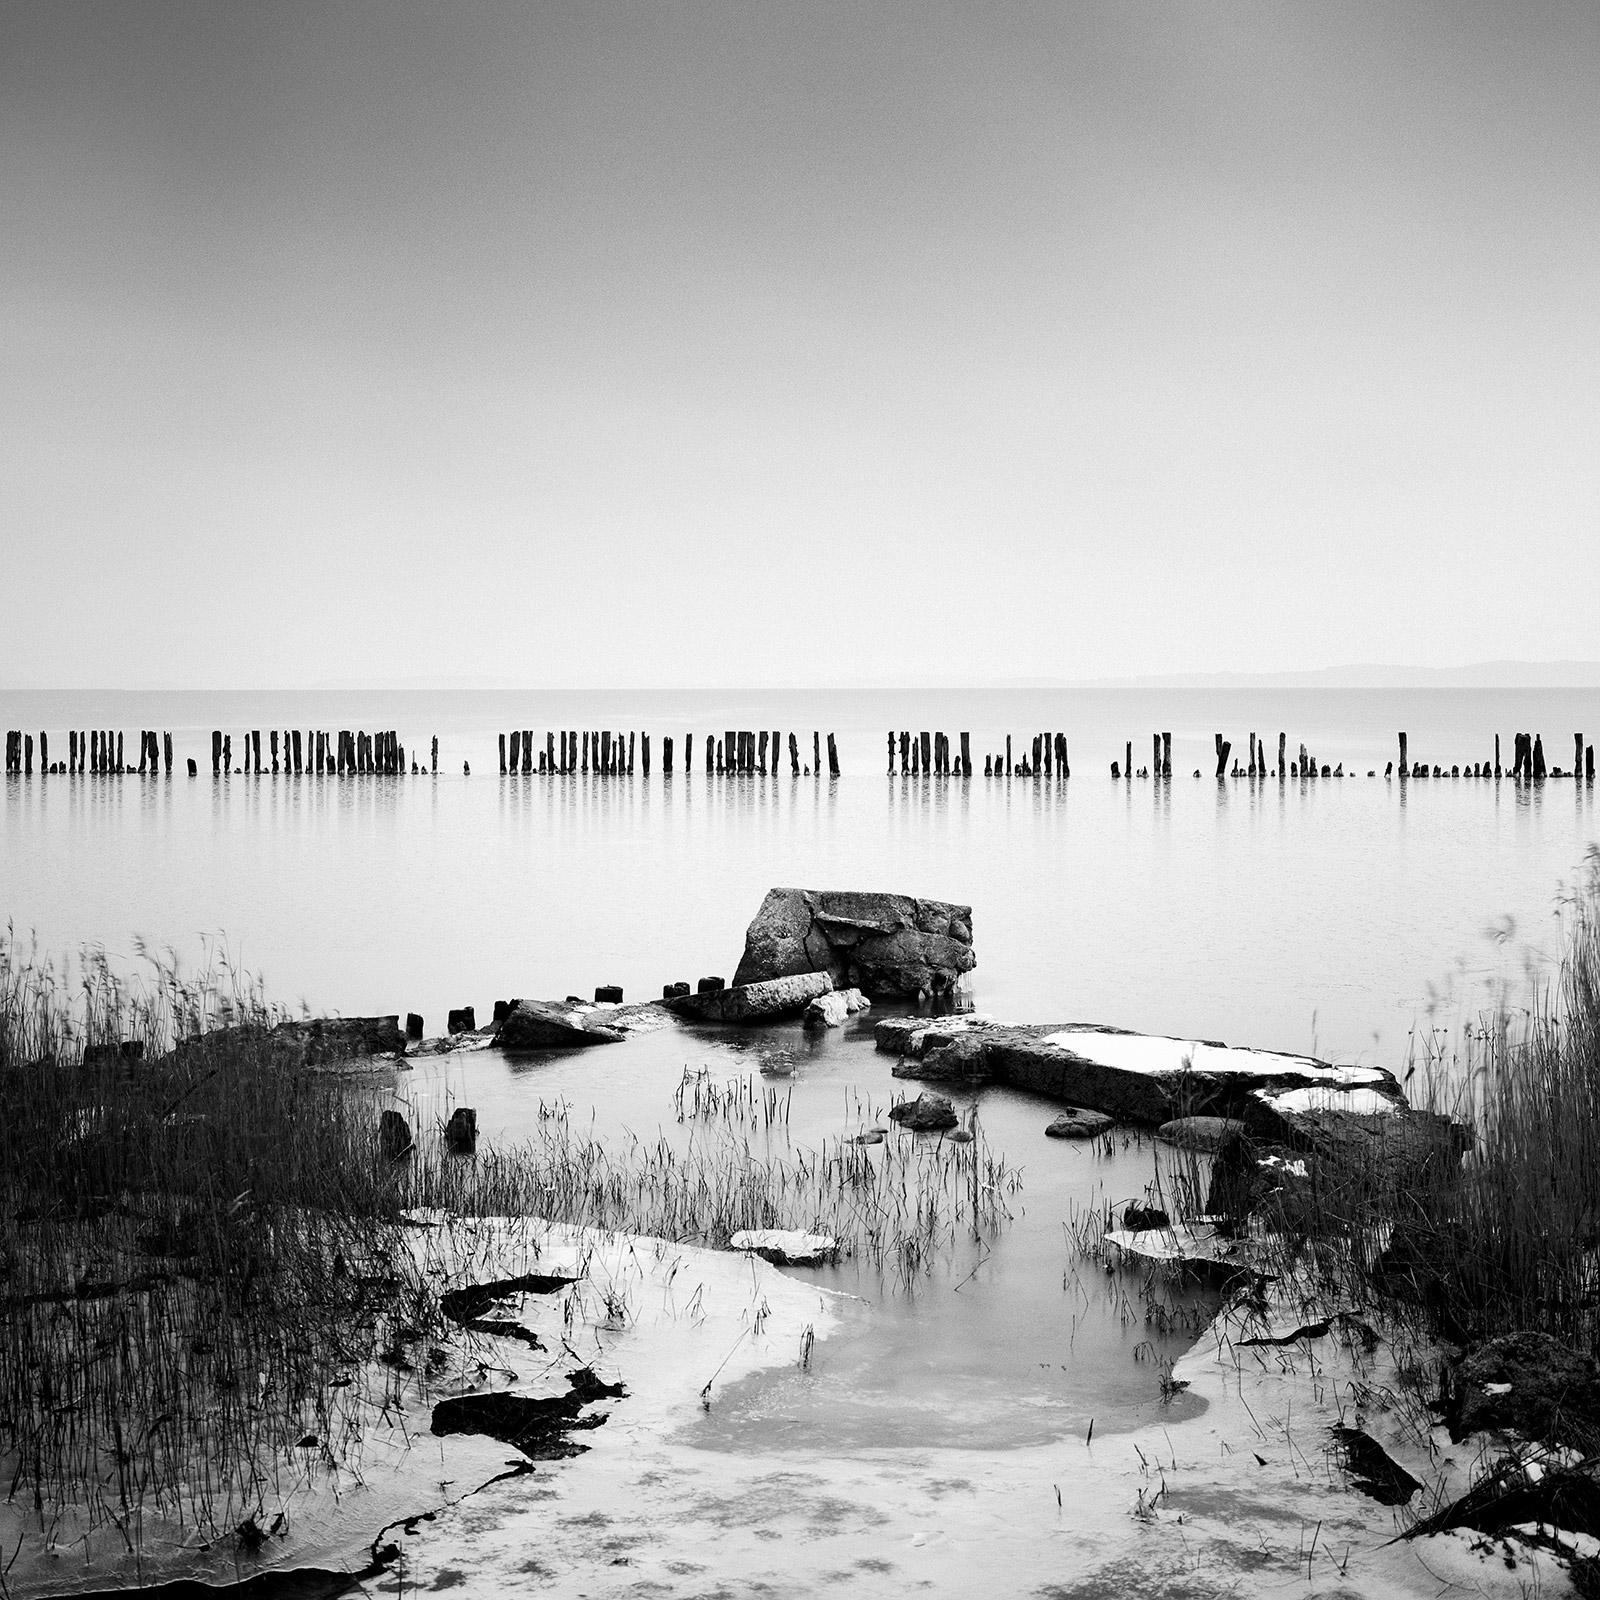 Behind the Fence, Island Rügen, Germany, black and white photography, landscape